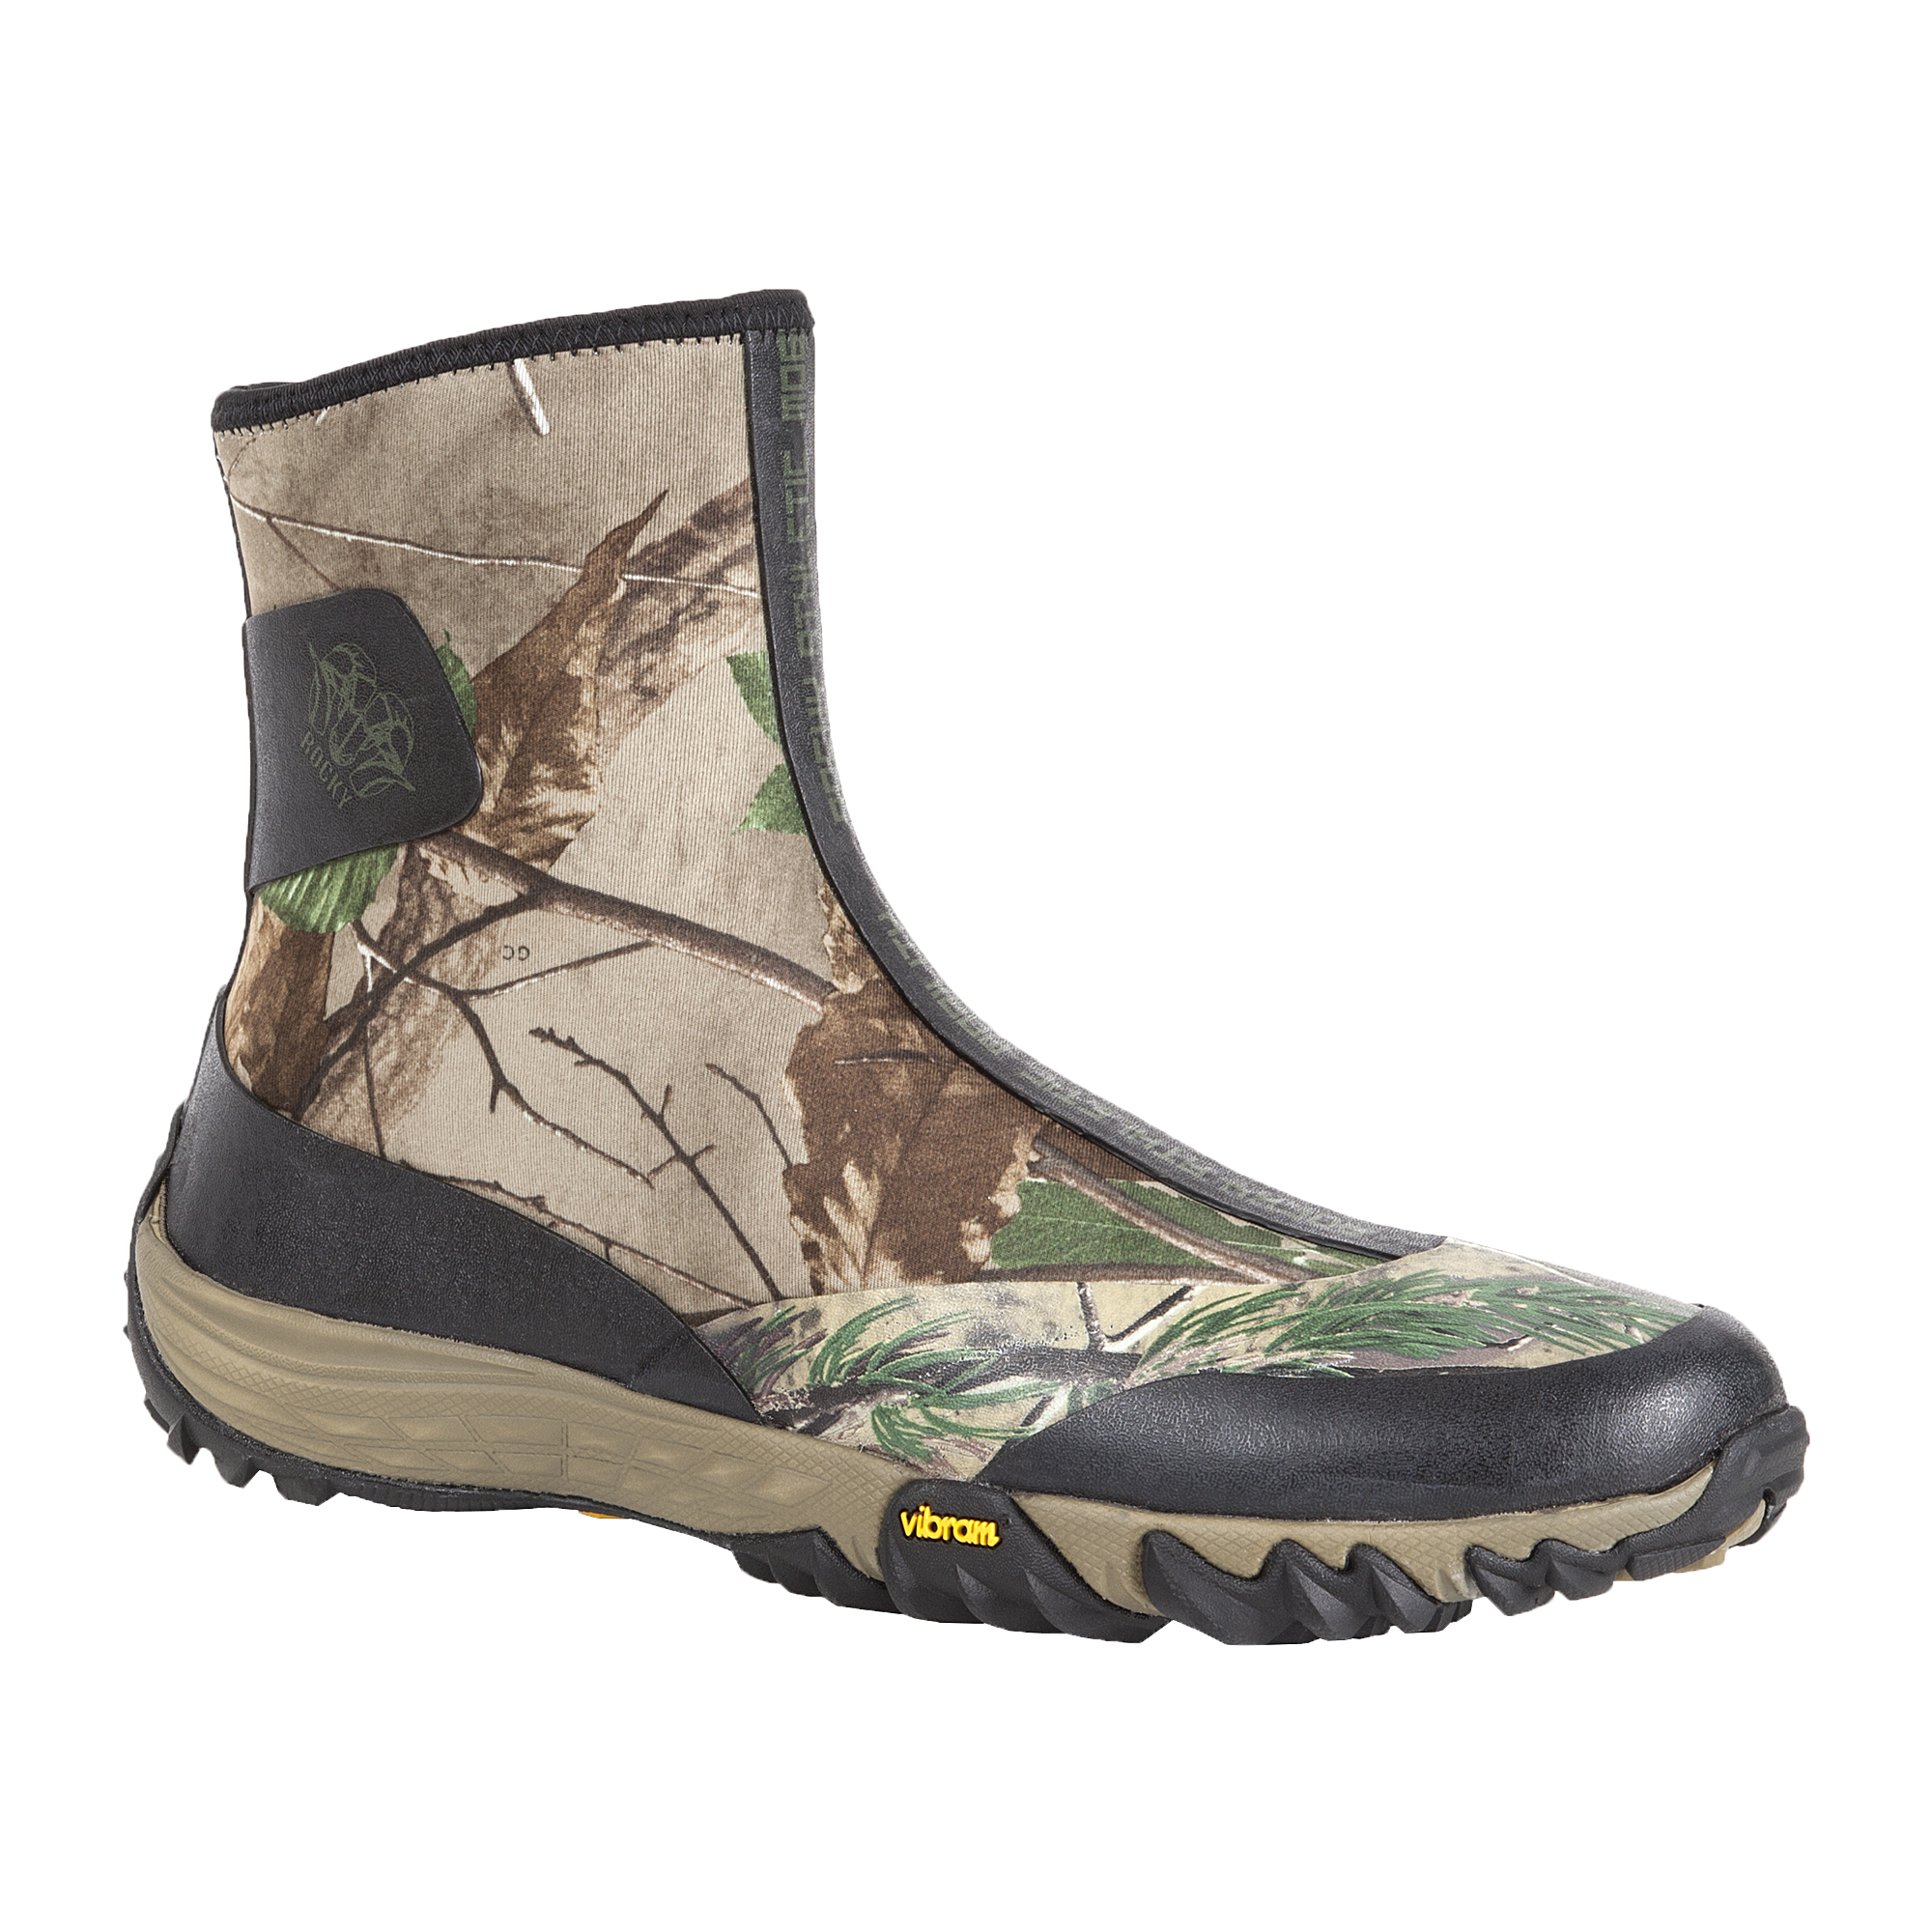 ROCKY Introduces SilentHunter Footware for Spring 2014 | OutdoorHub